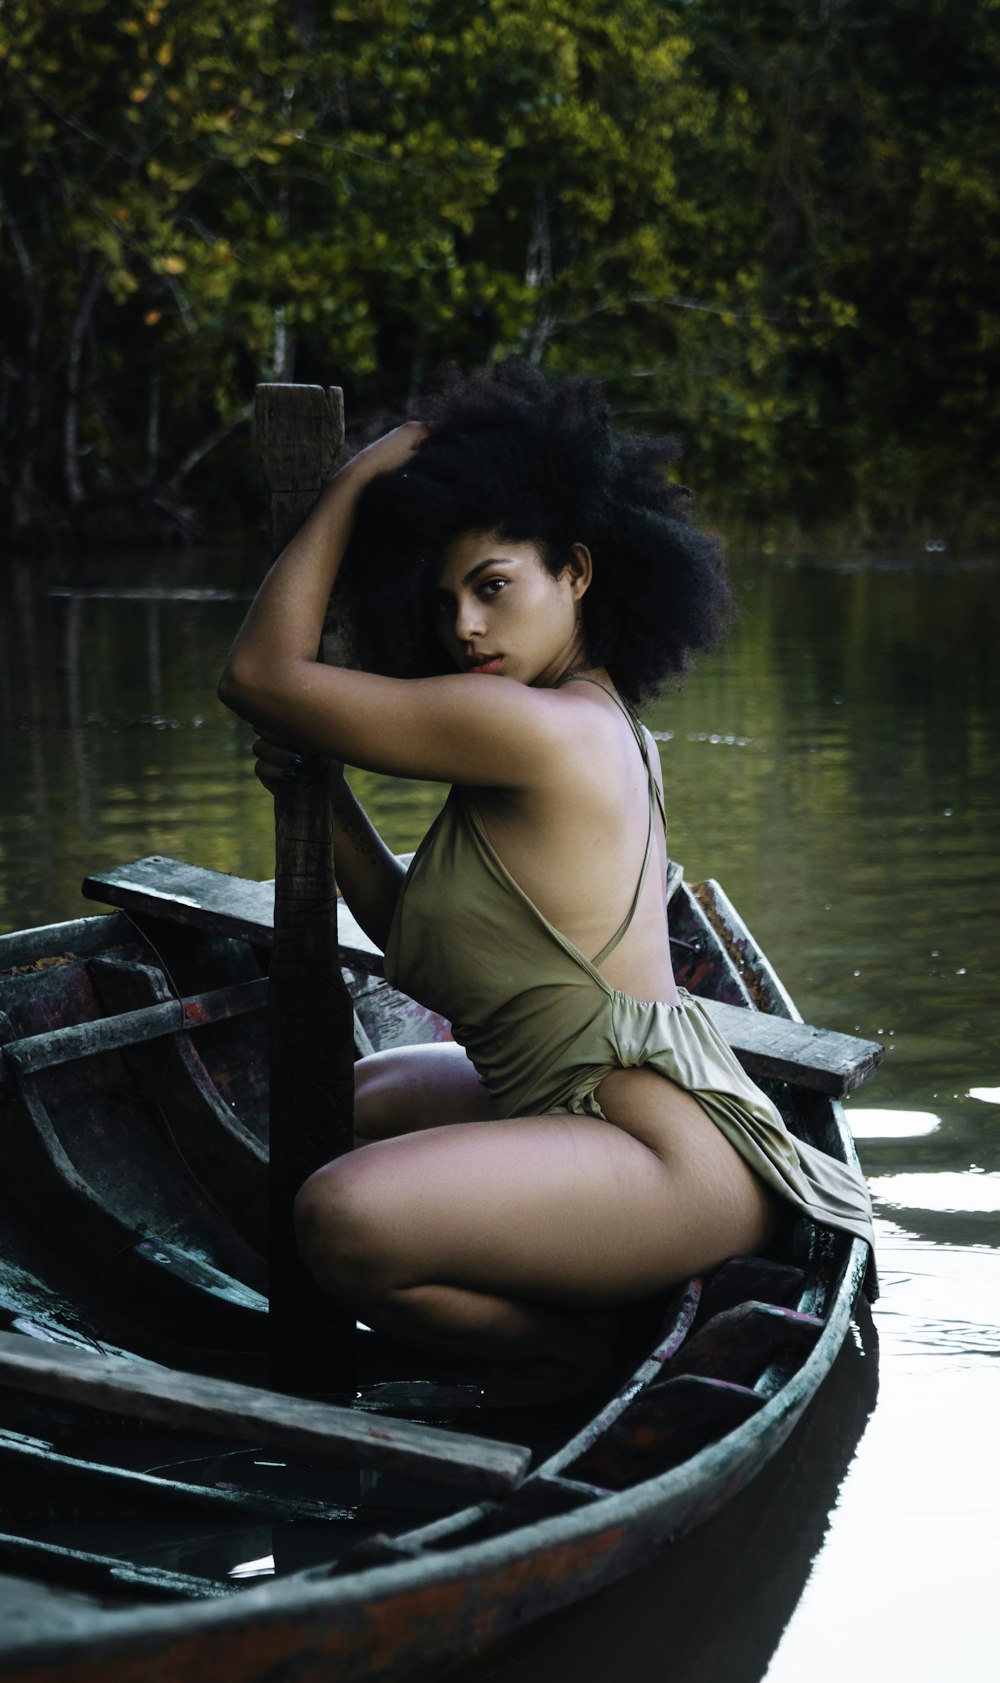 a woman in a bathing suit sitting in a boat